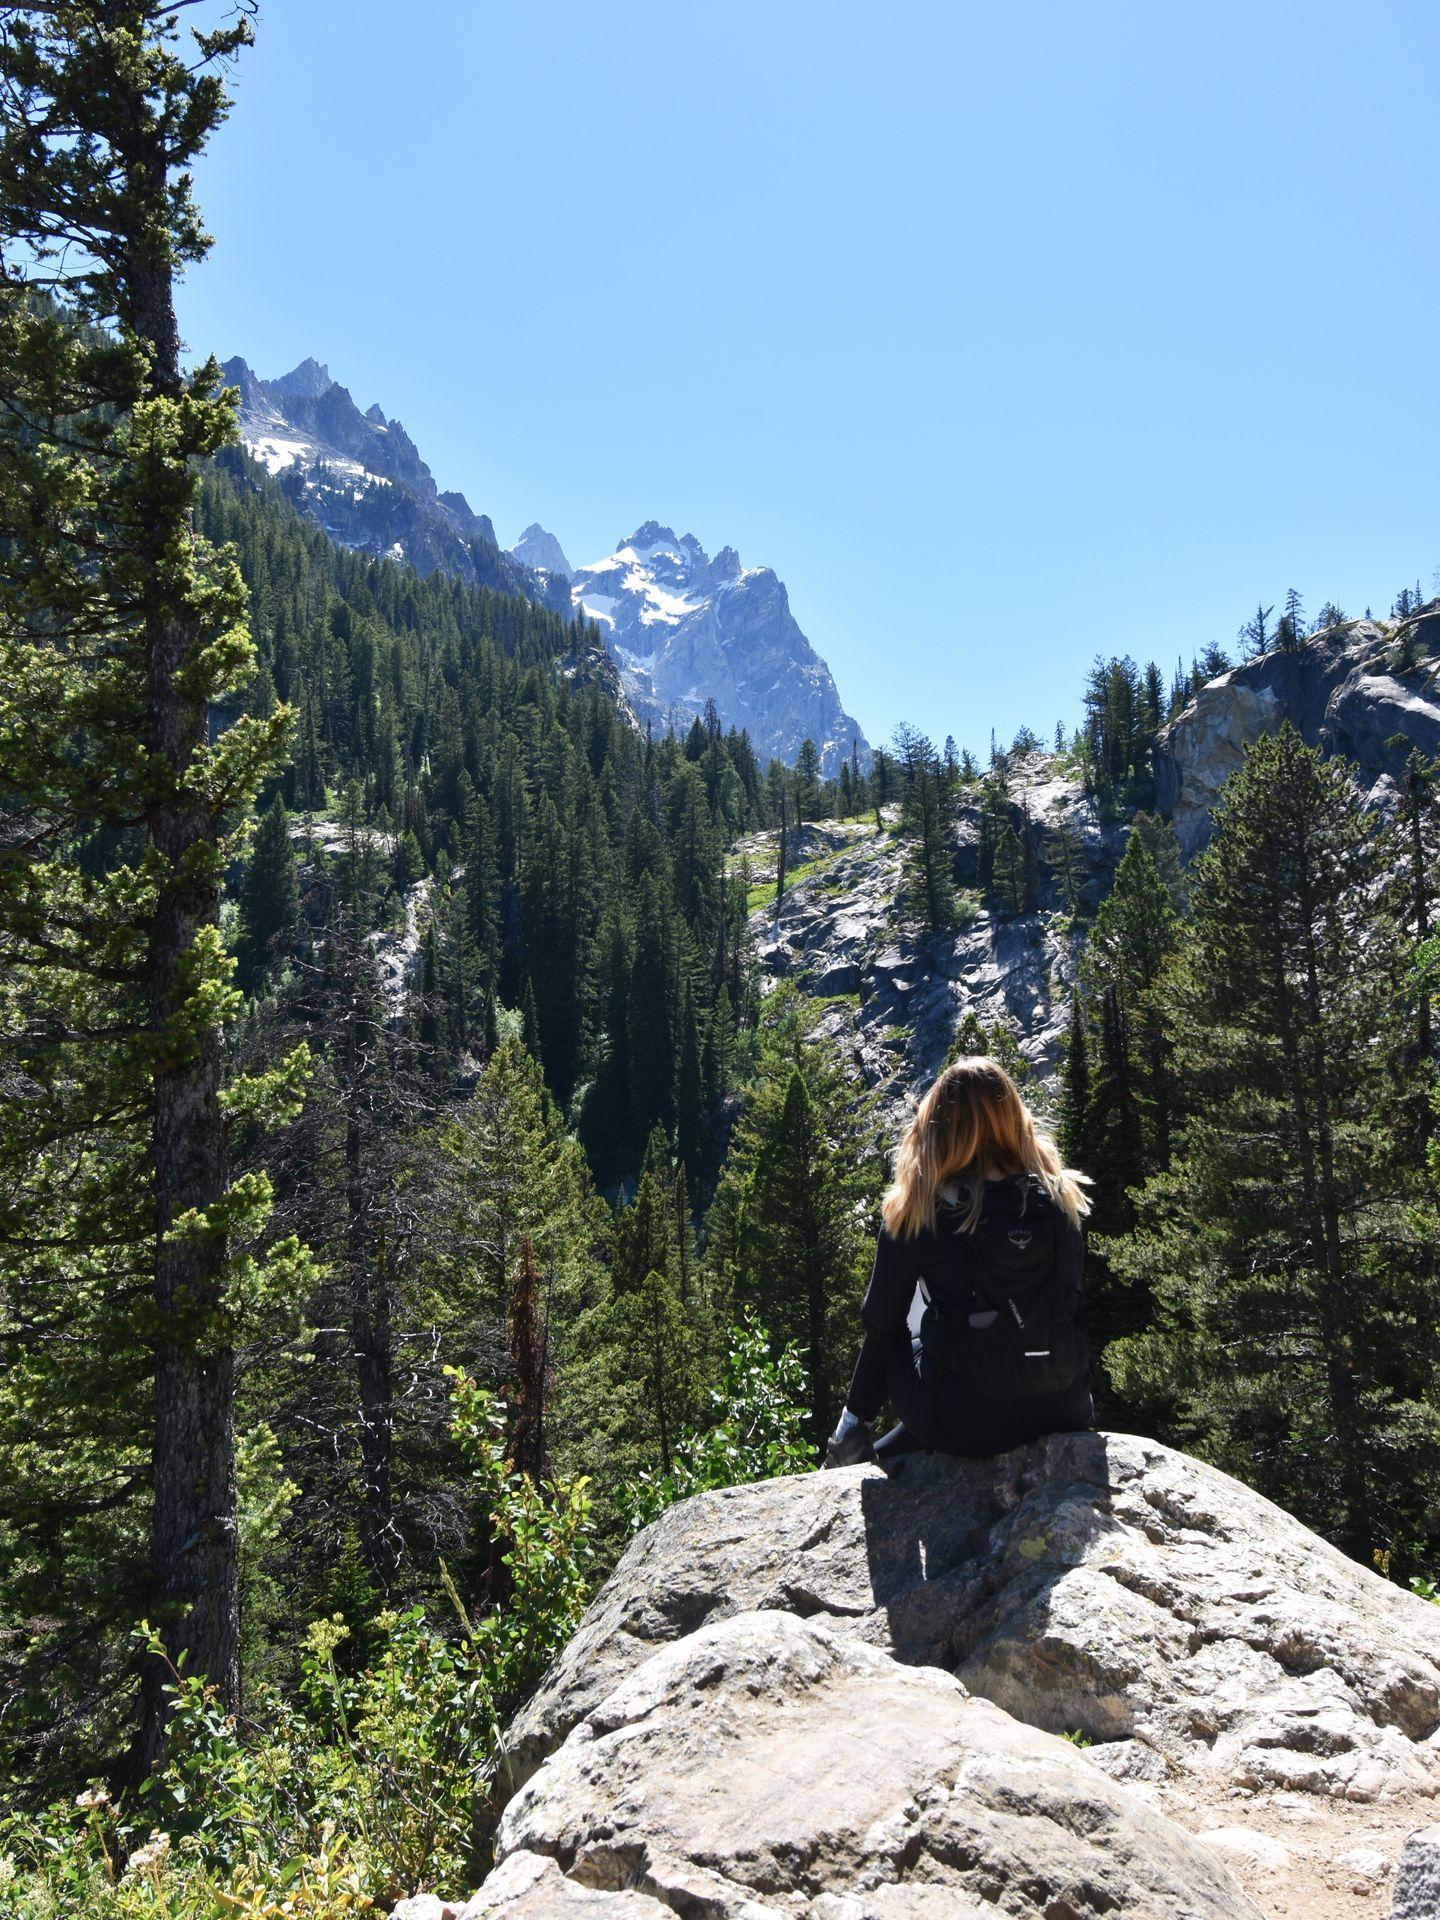 Lydia sitting on a rock looking out at a mountain view on the hike to Inspiration Point in Grand Teton National Park.